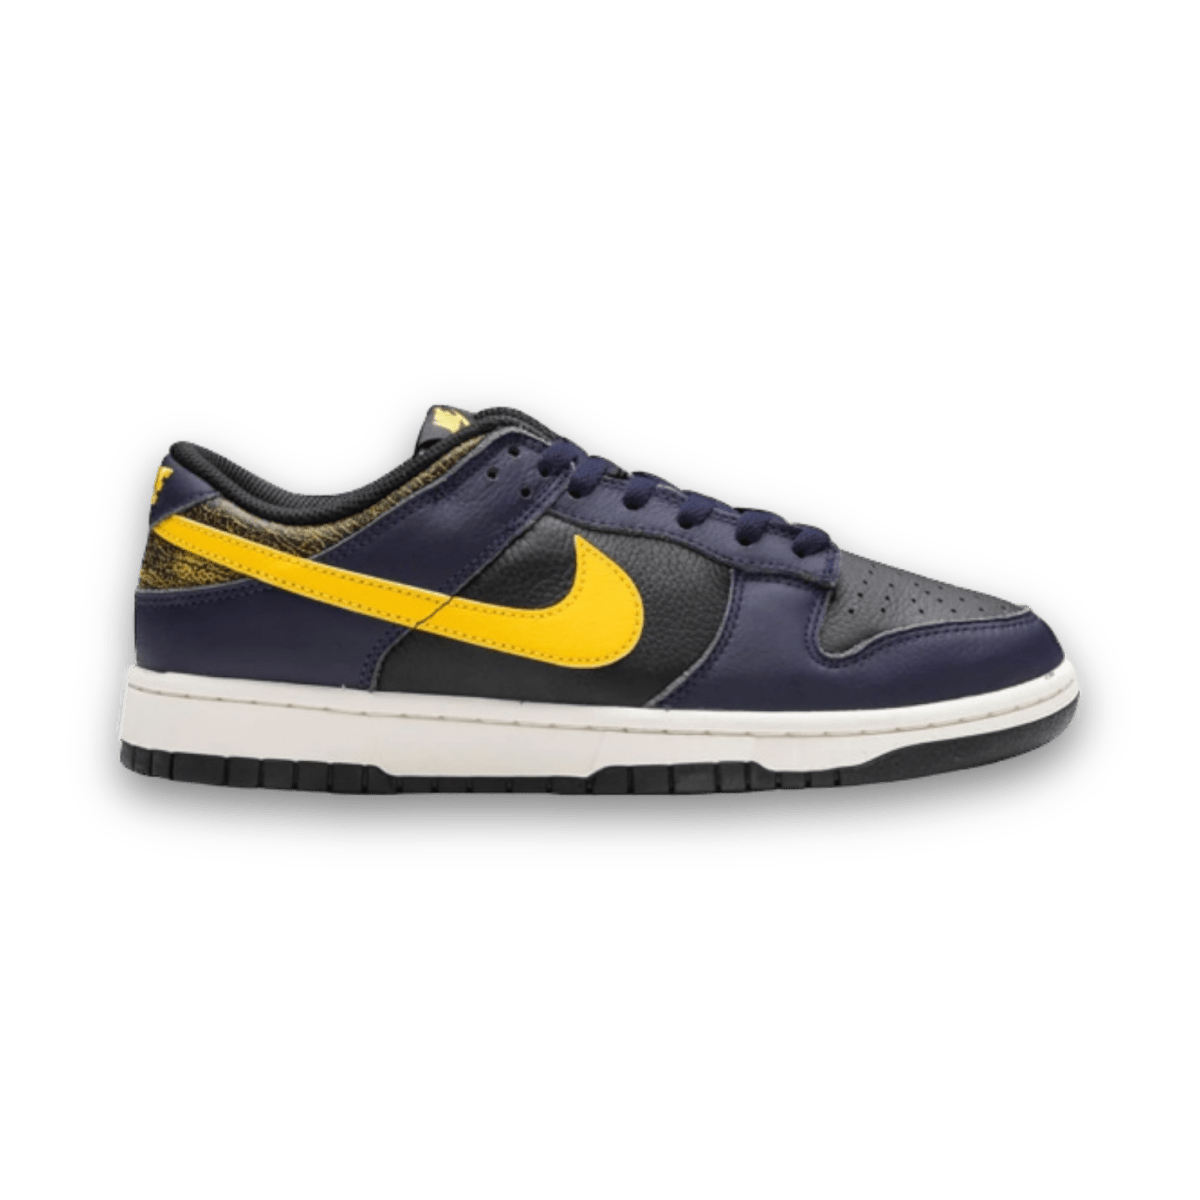 Dunk Low Retro Vintage 'Michigan' - High Sneaker - Dunks - Jawns on Fire - sneakers